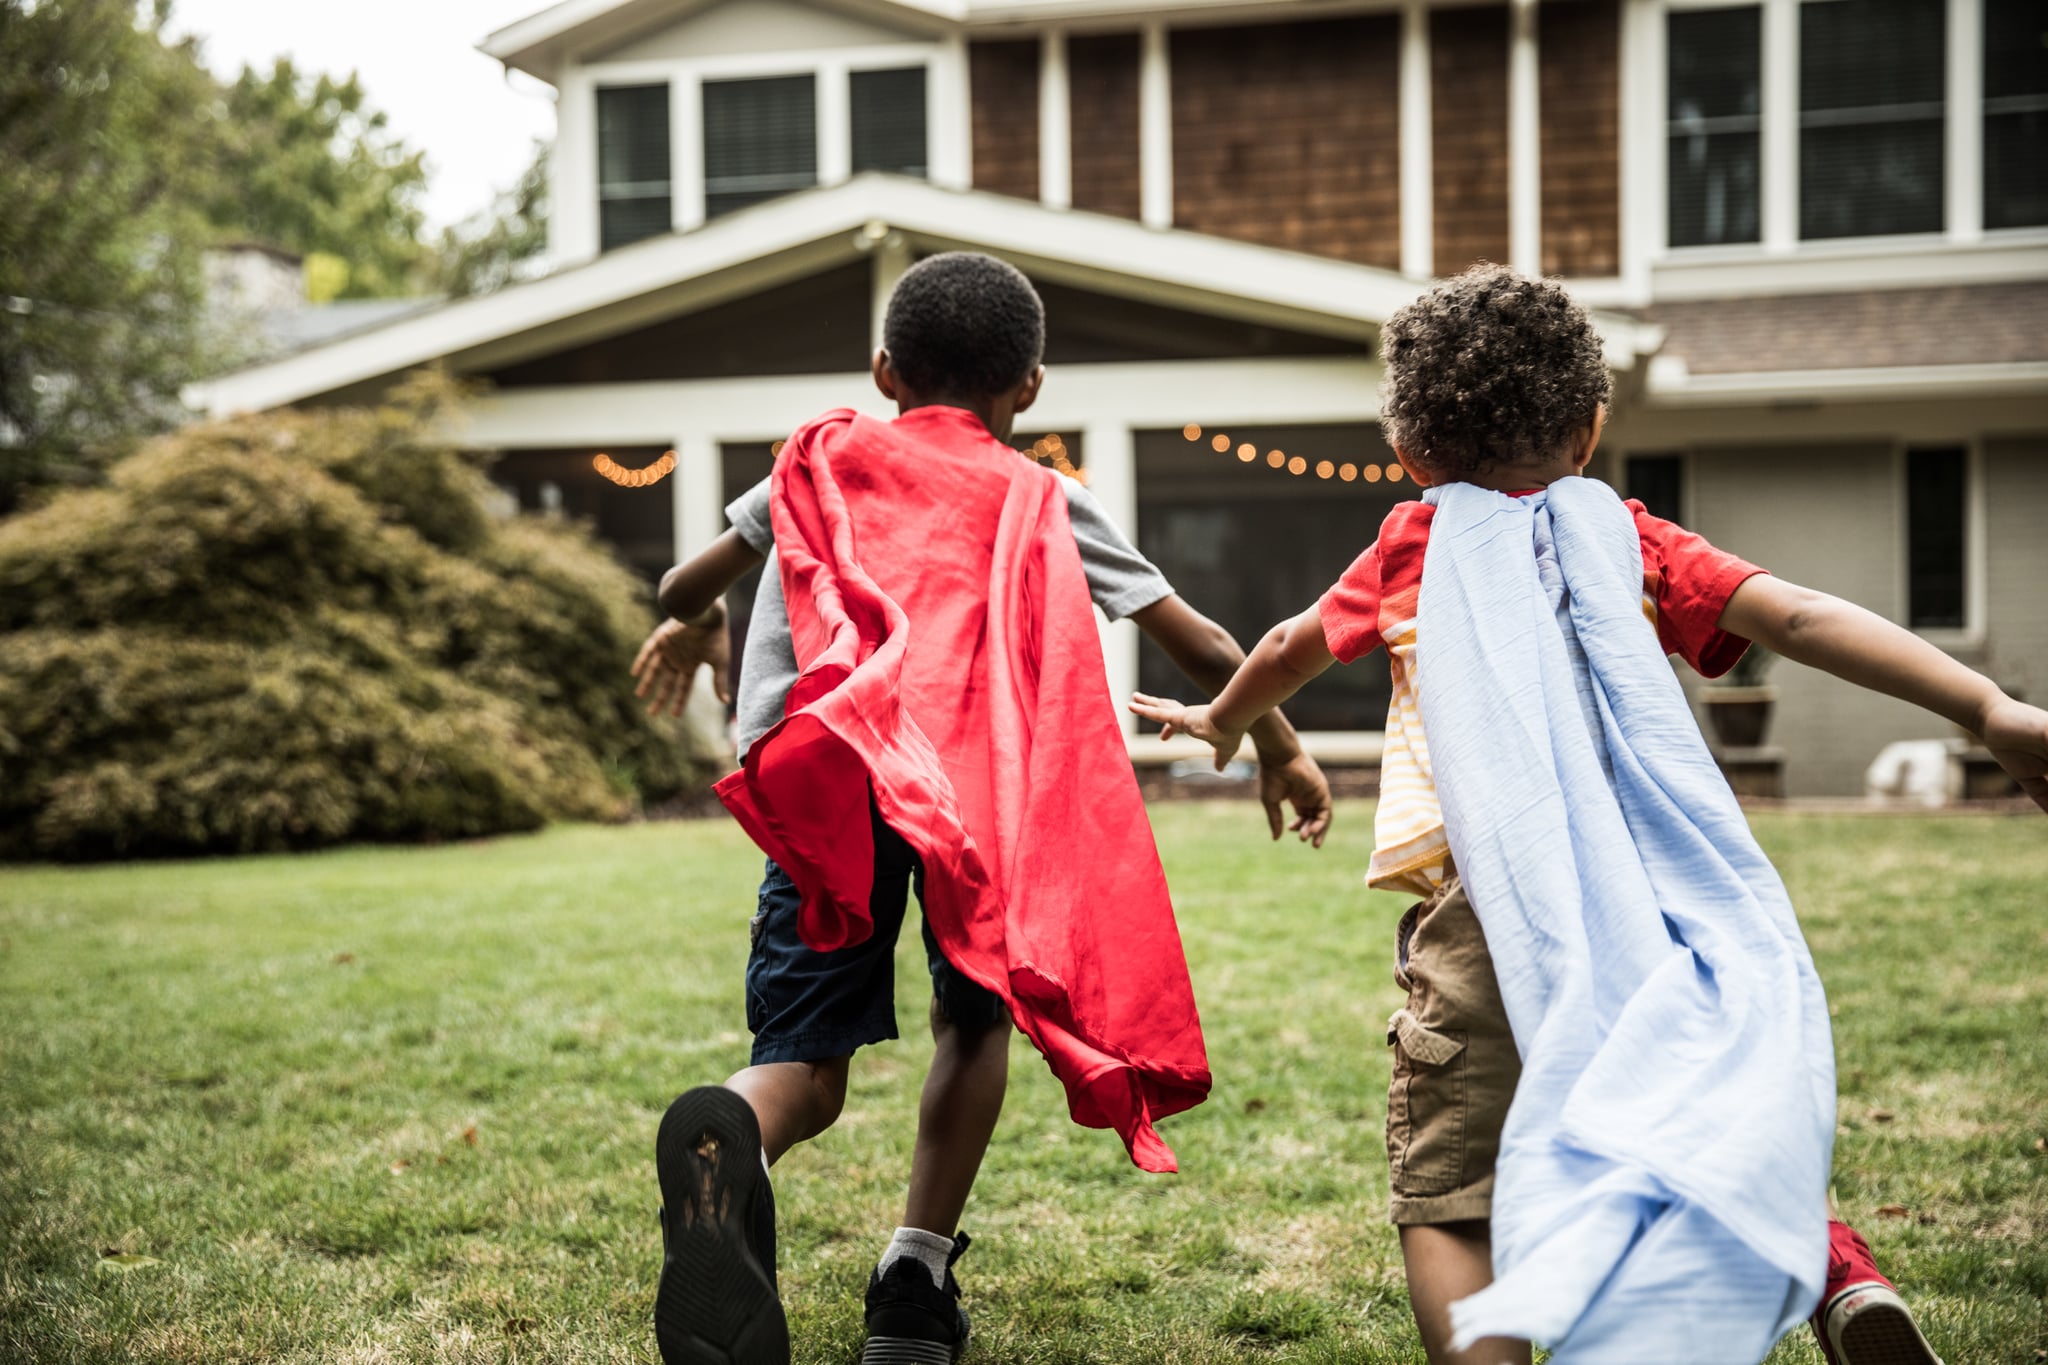 Young boys (3 yrs and 6yrs) in capes playing in backyard